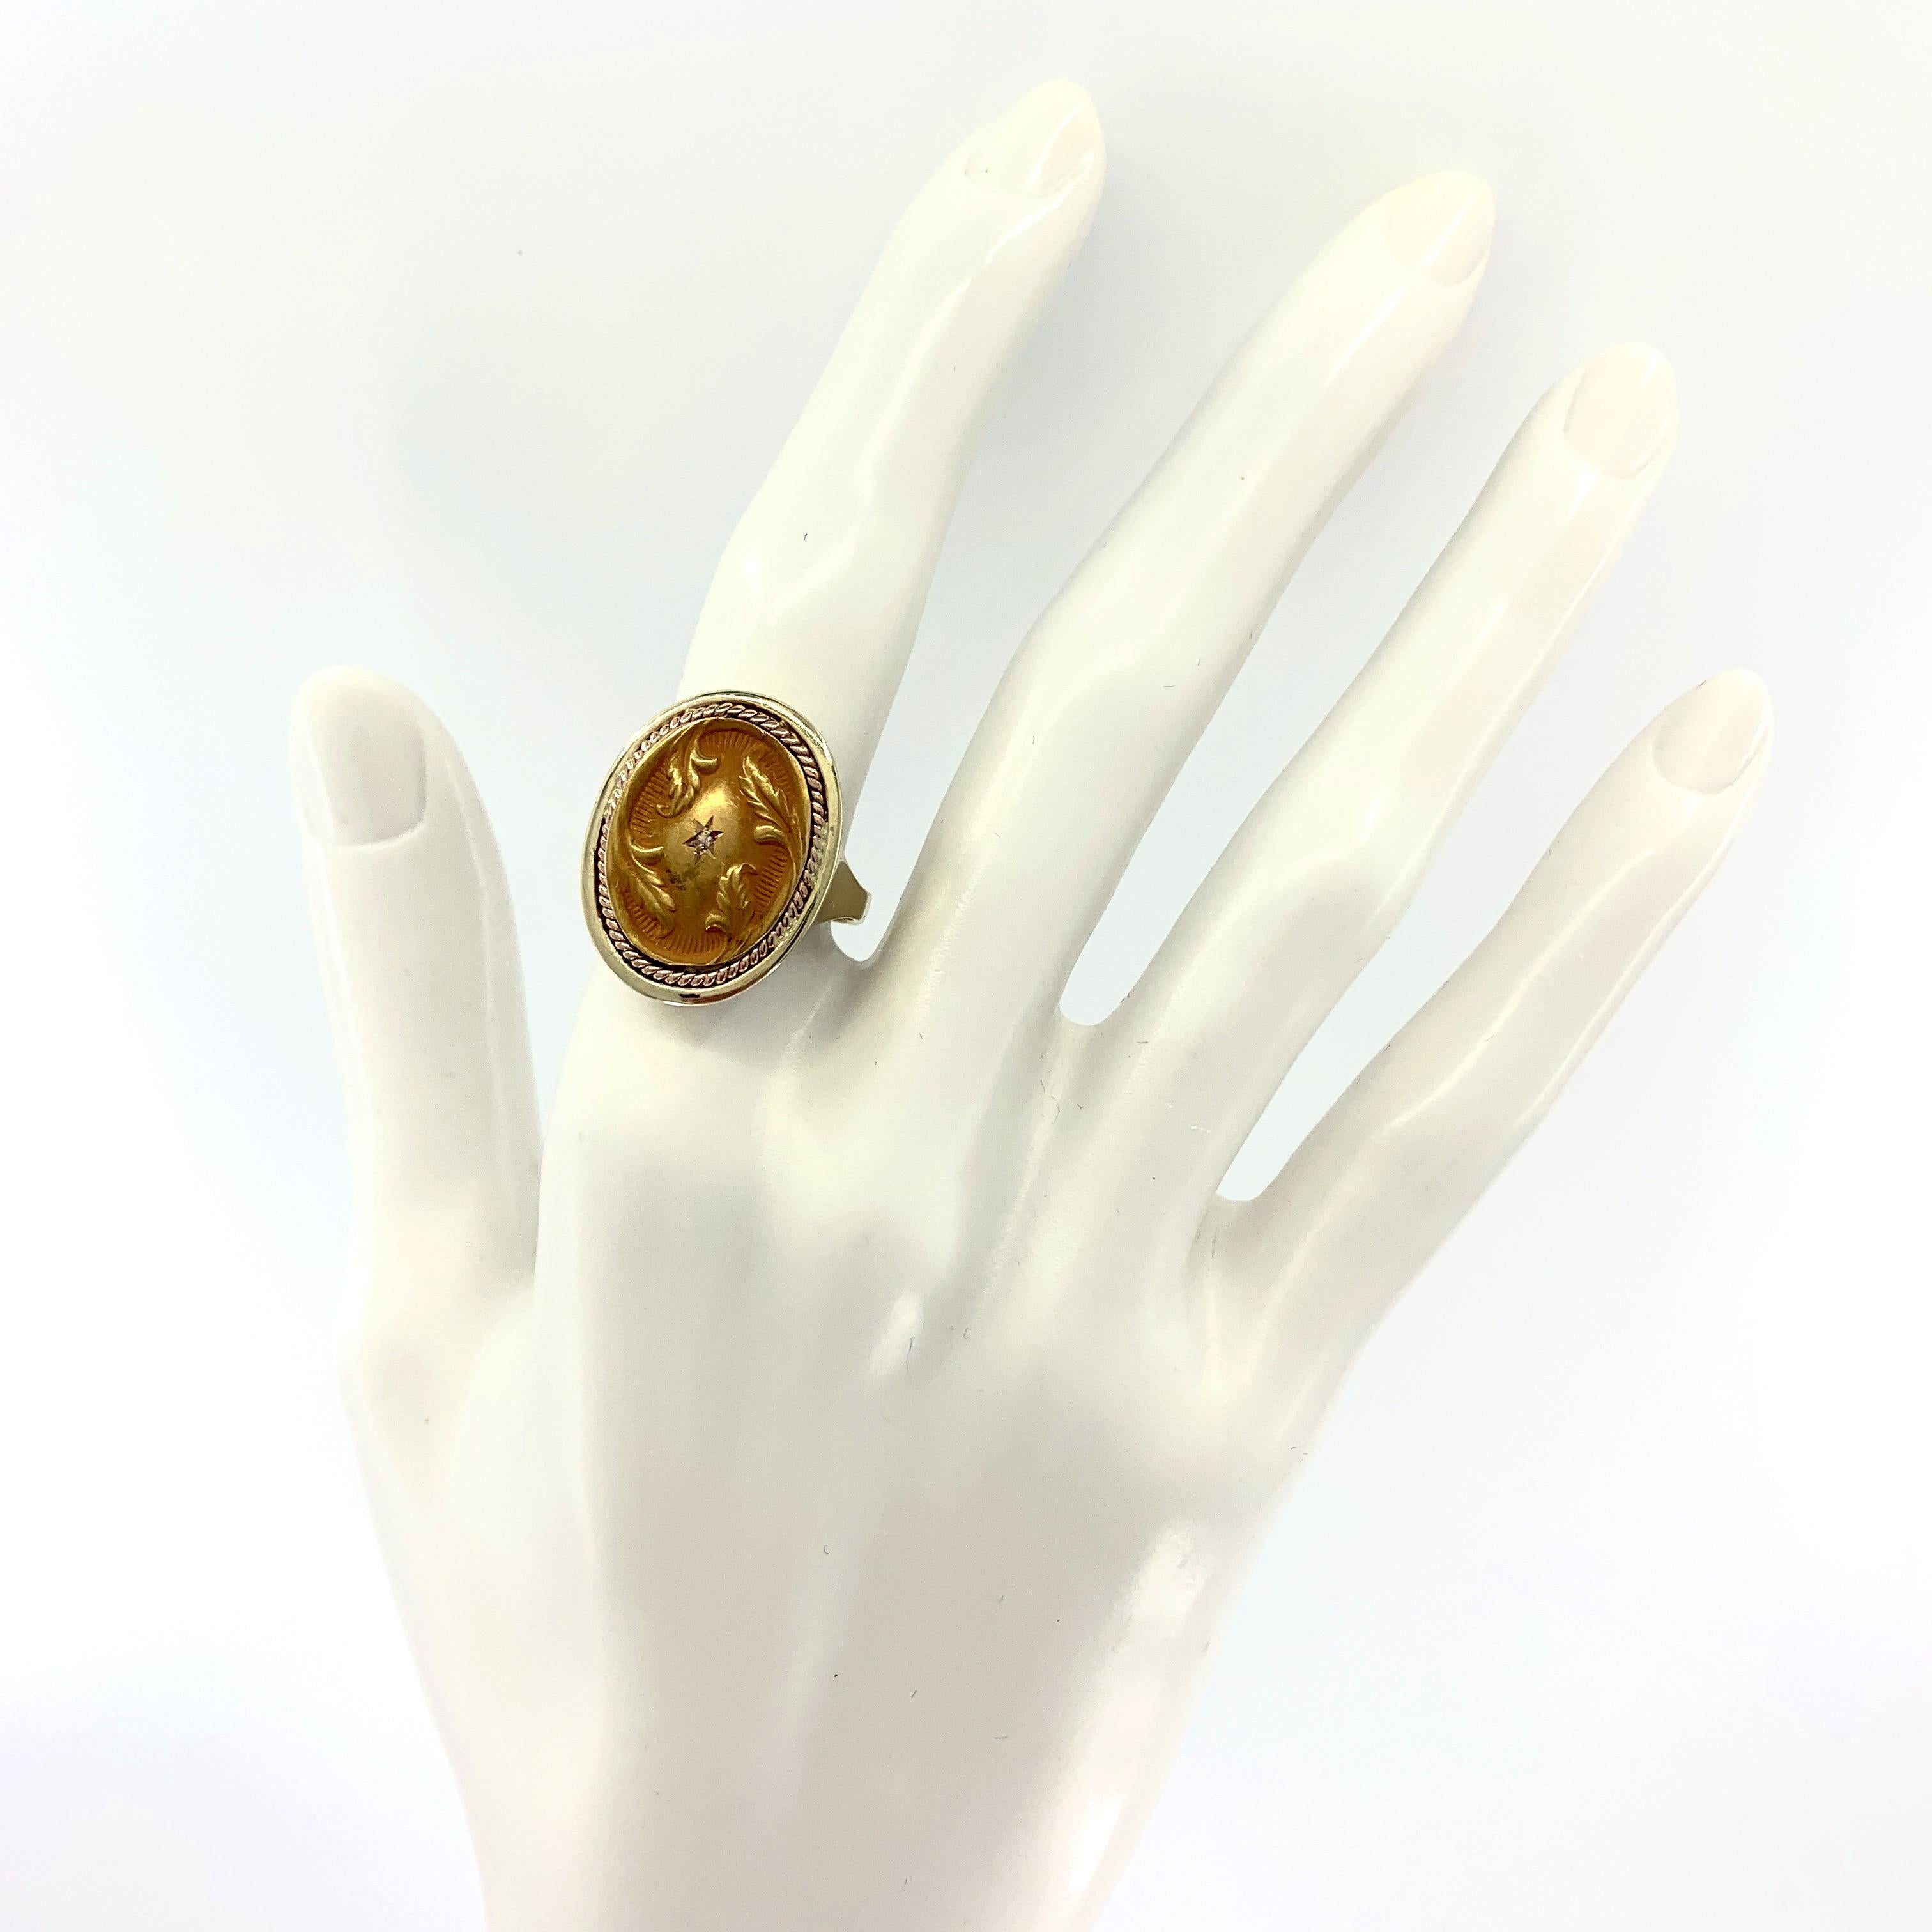 This was originally a blank signet ring set with a sad-looking onyx, but since we're always looking for a way to unburden the store of its cufflinks, we popped out the offending agate in favor of a very old 18 karat yellow gold cuff stud. 

The pale